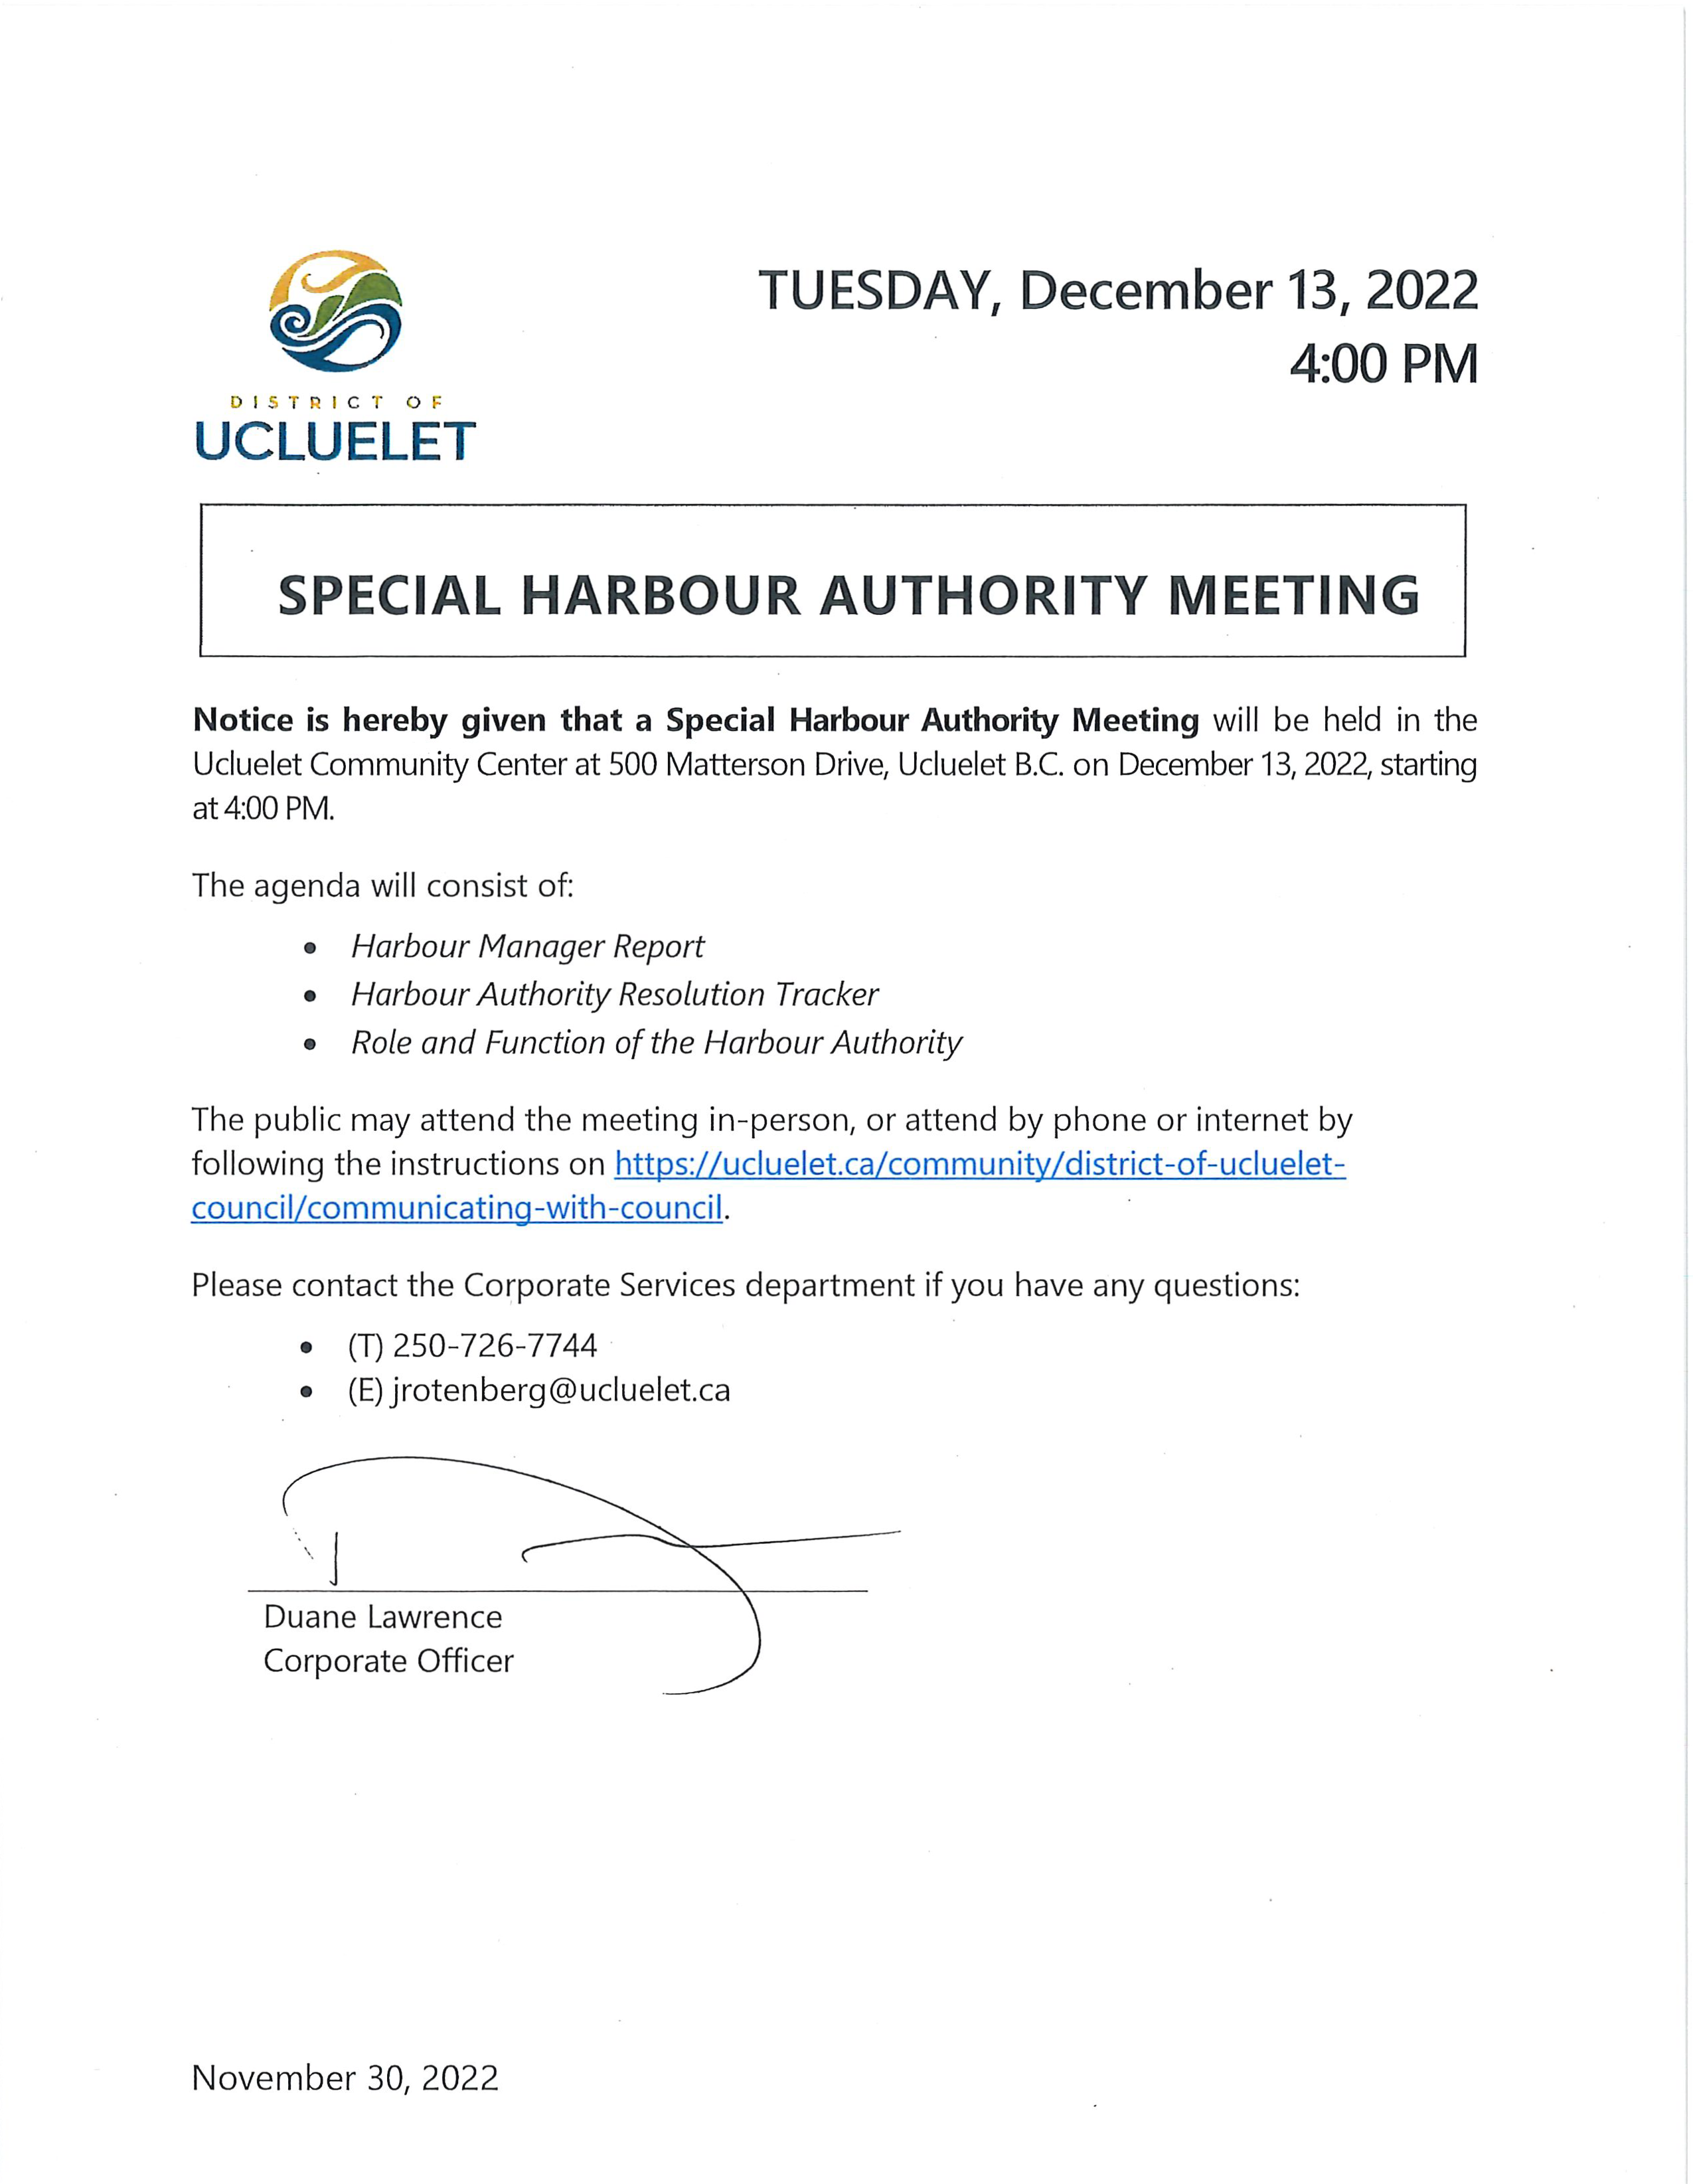 2022-12-13_Special_Harbour_Authority.png